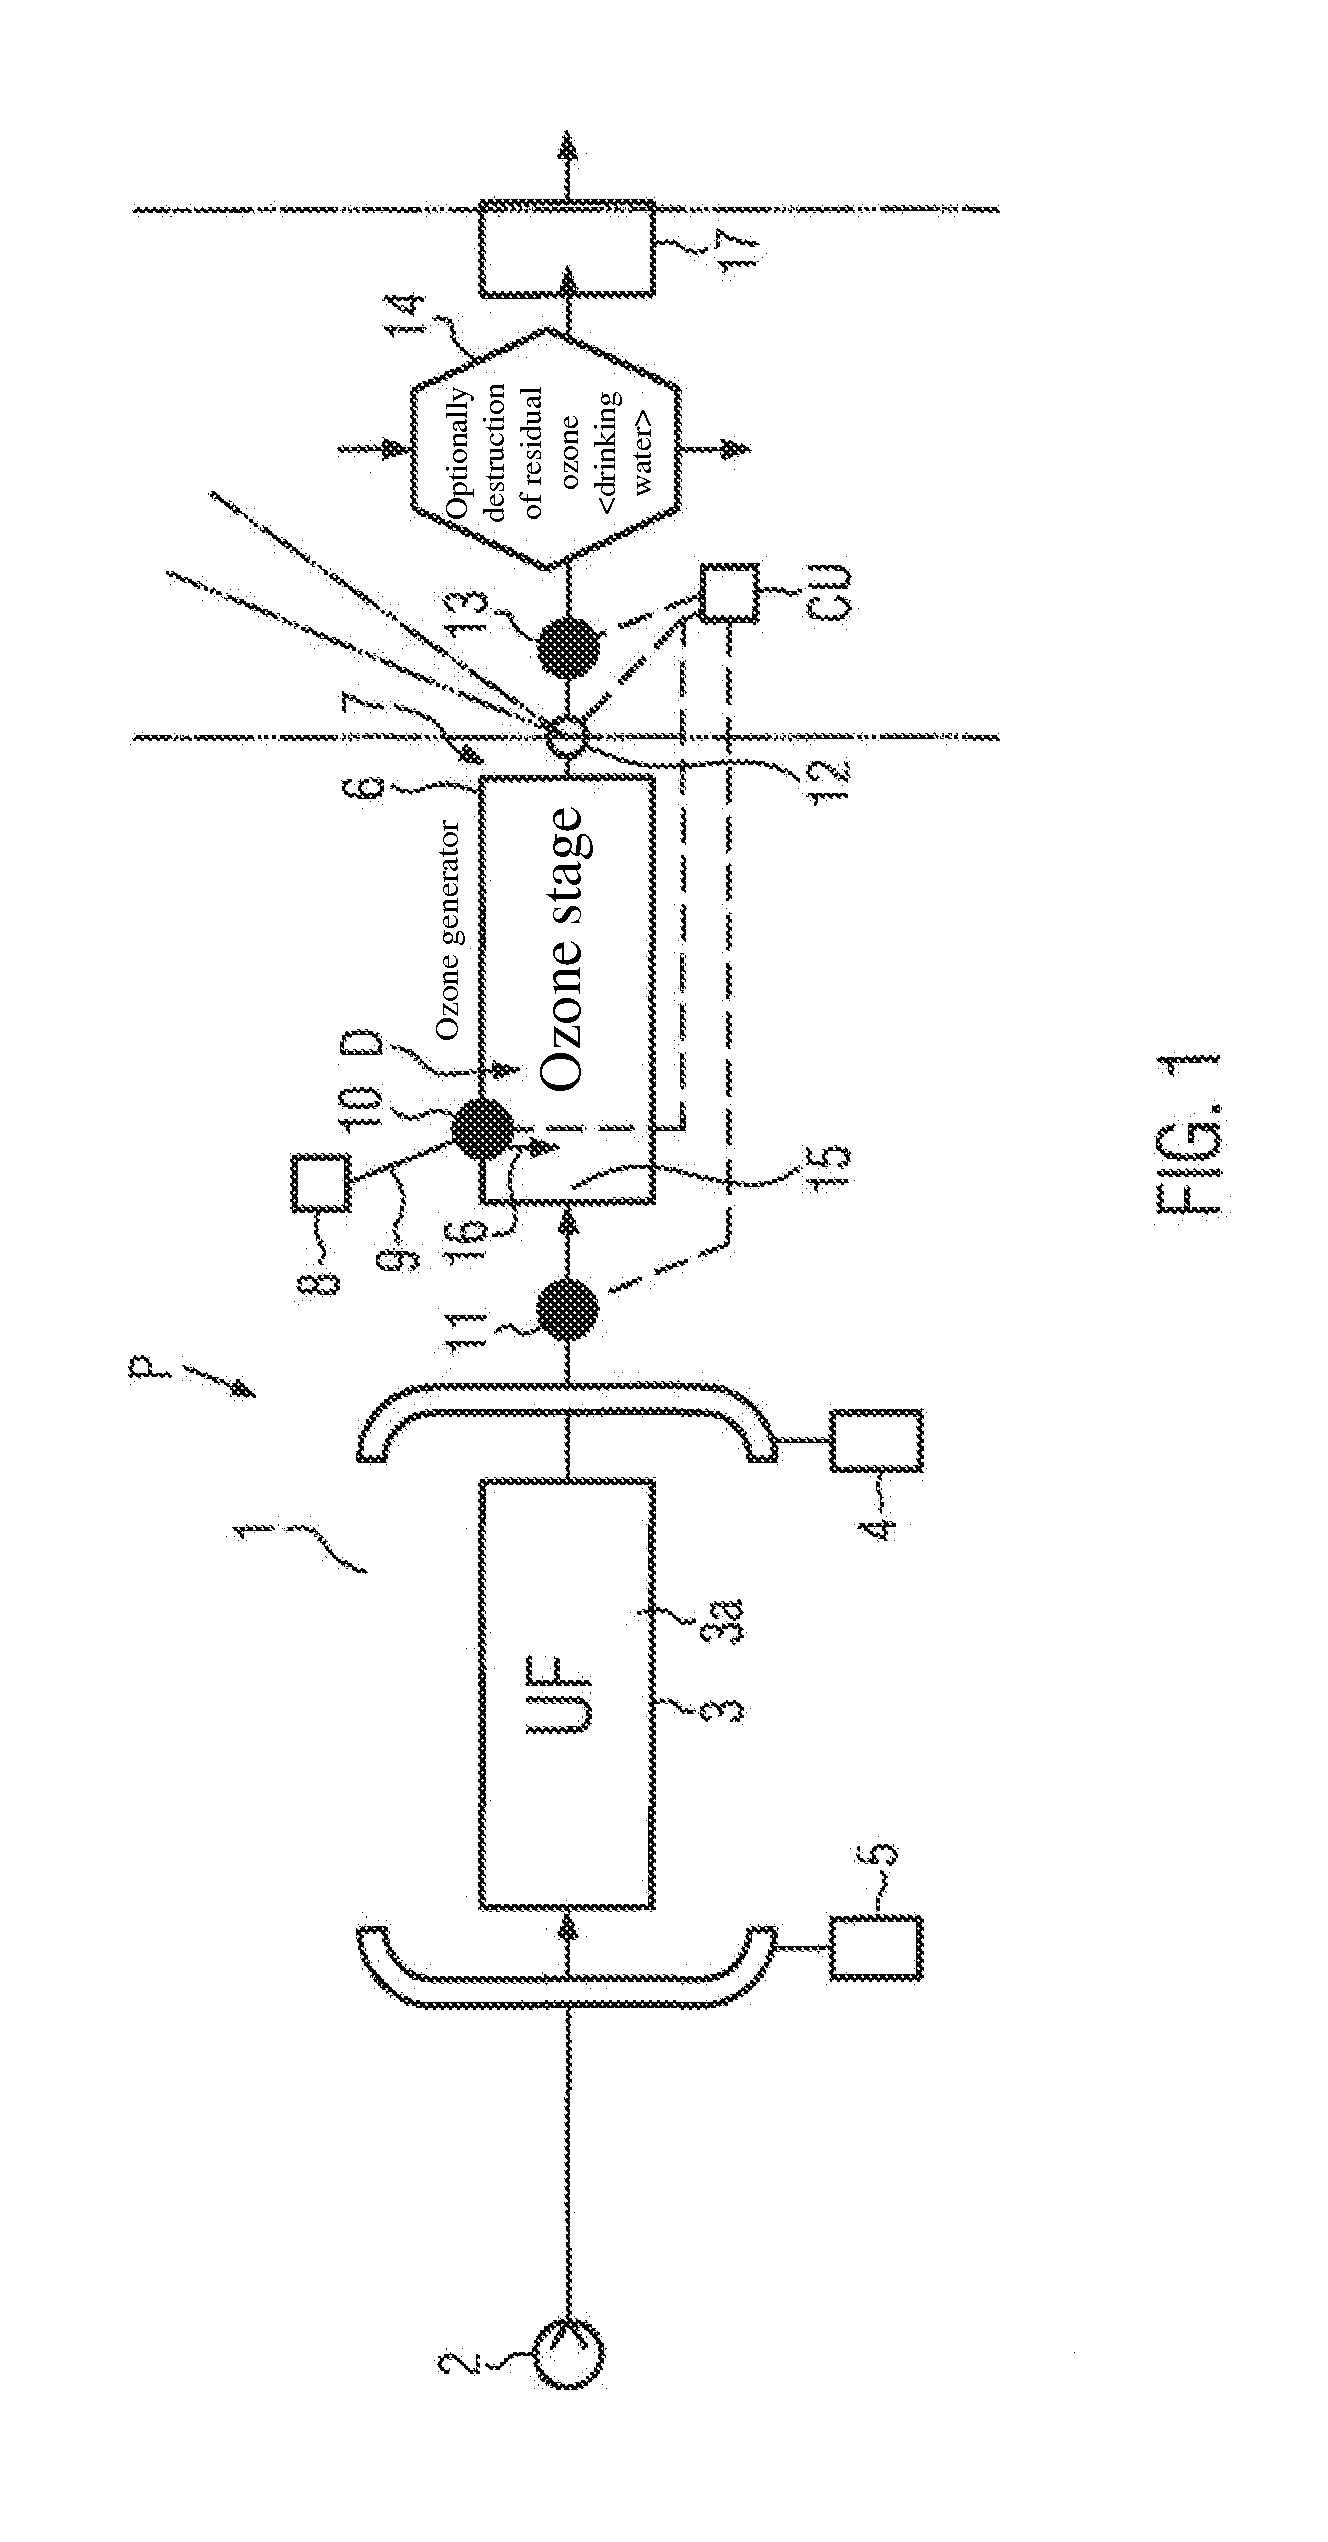 Method and production plant for producing sterile water